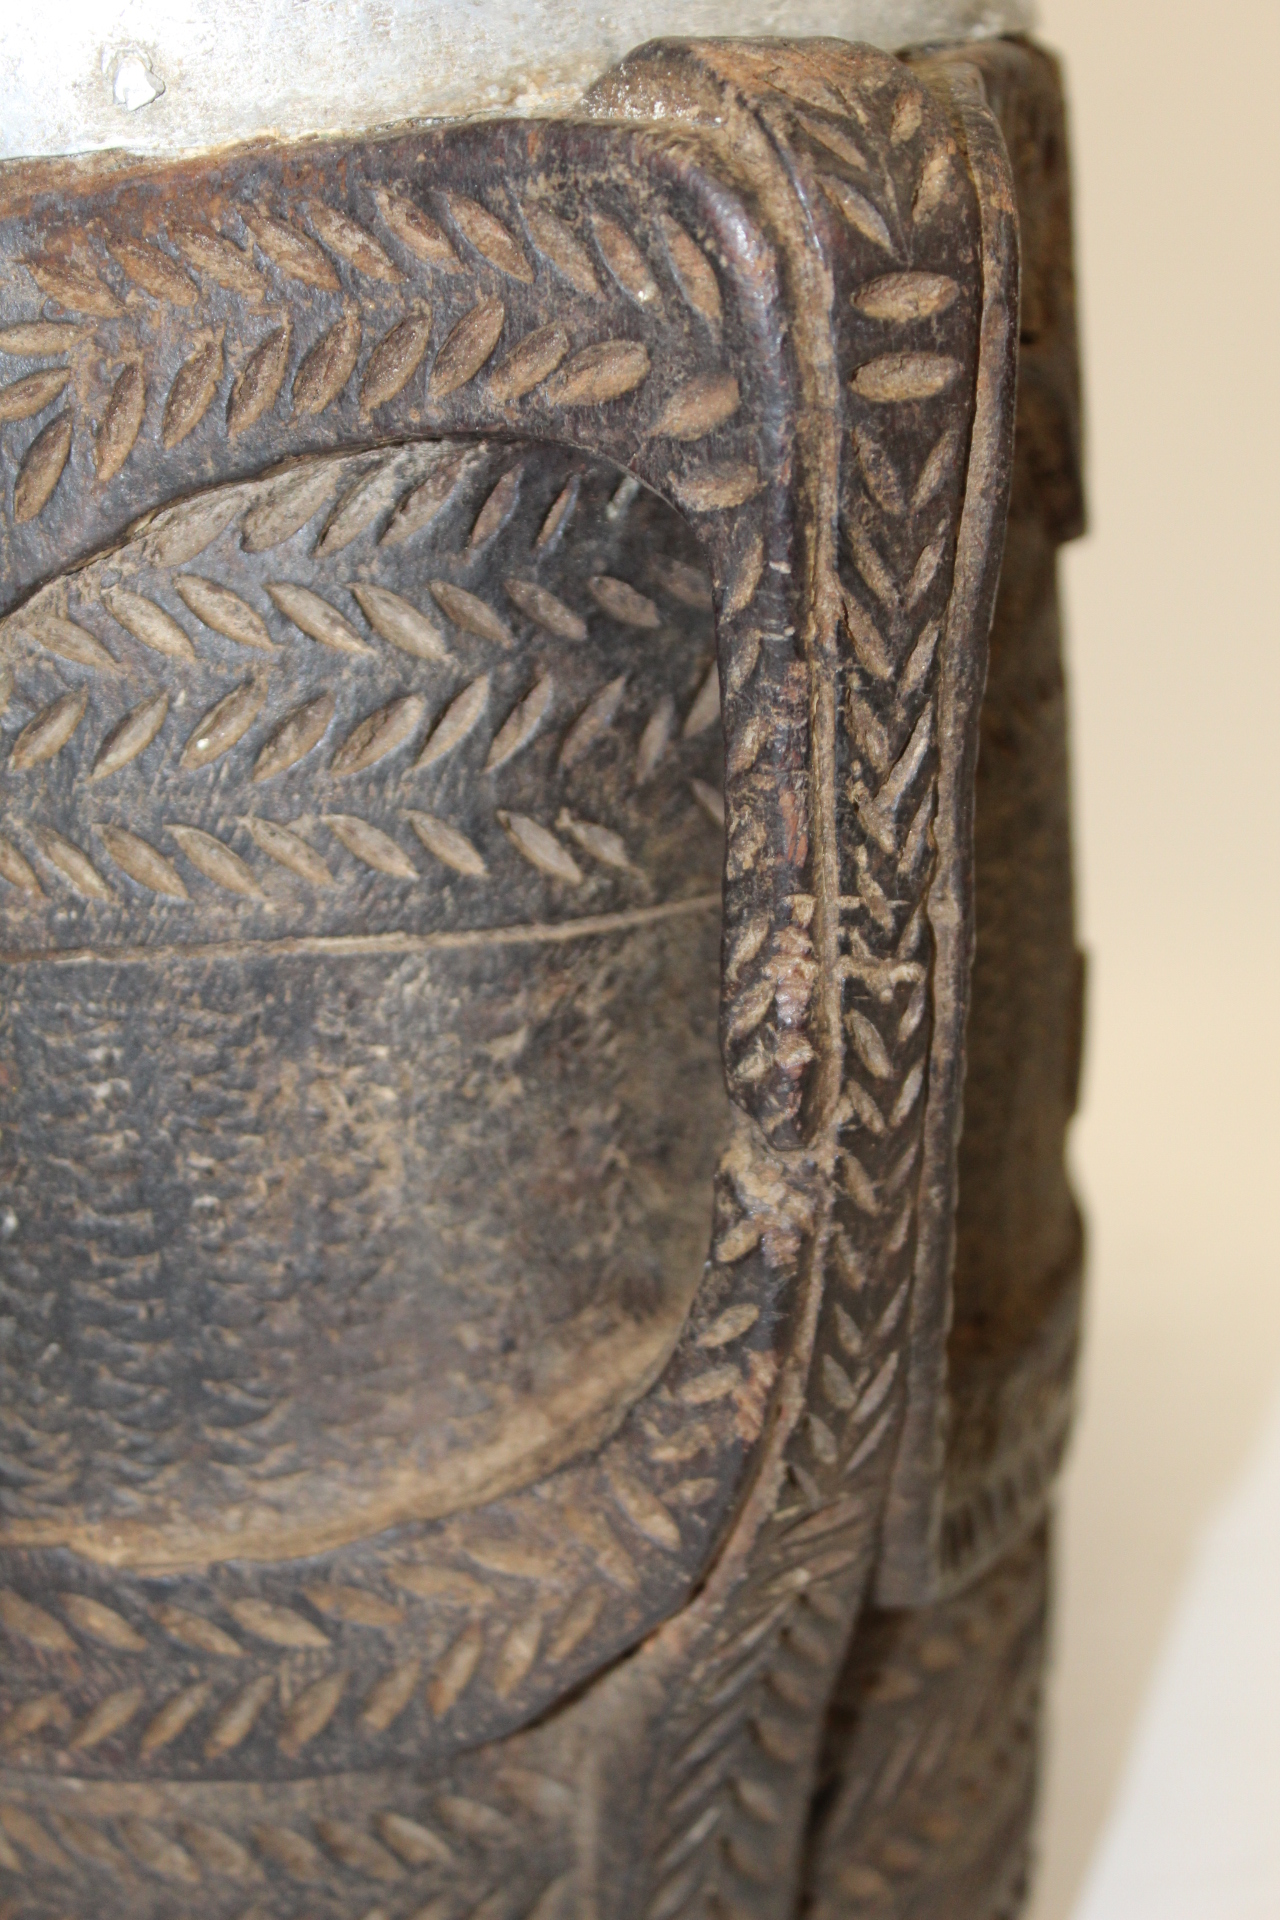 Antique Nepalese or Tibetan yak milk pot with metal banding to rim and foot, metal carrying loops, - Image 10 of 14